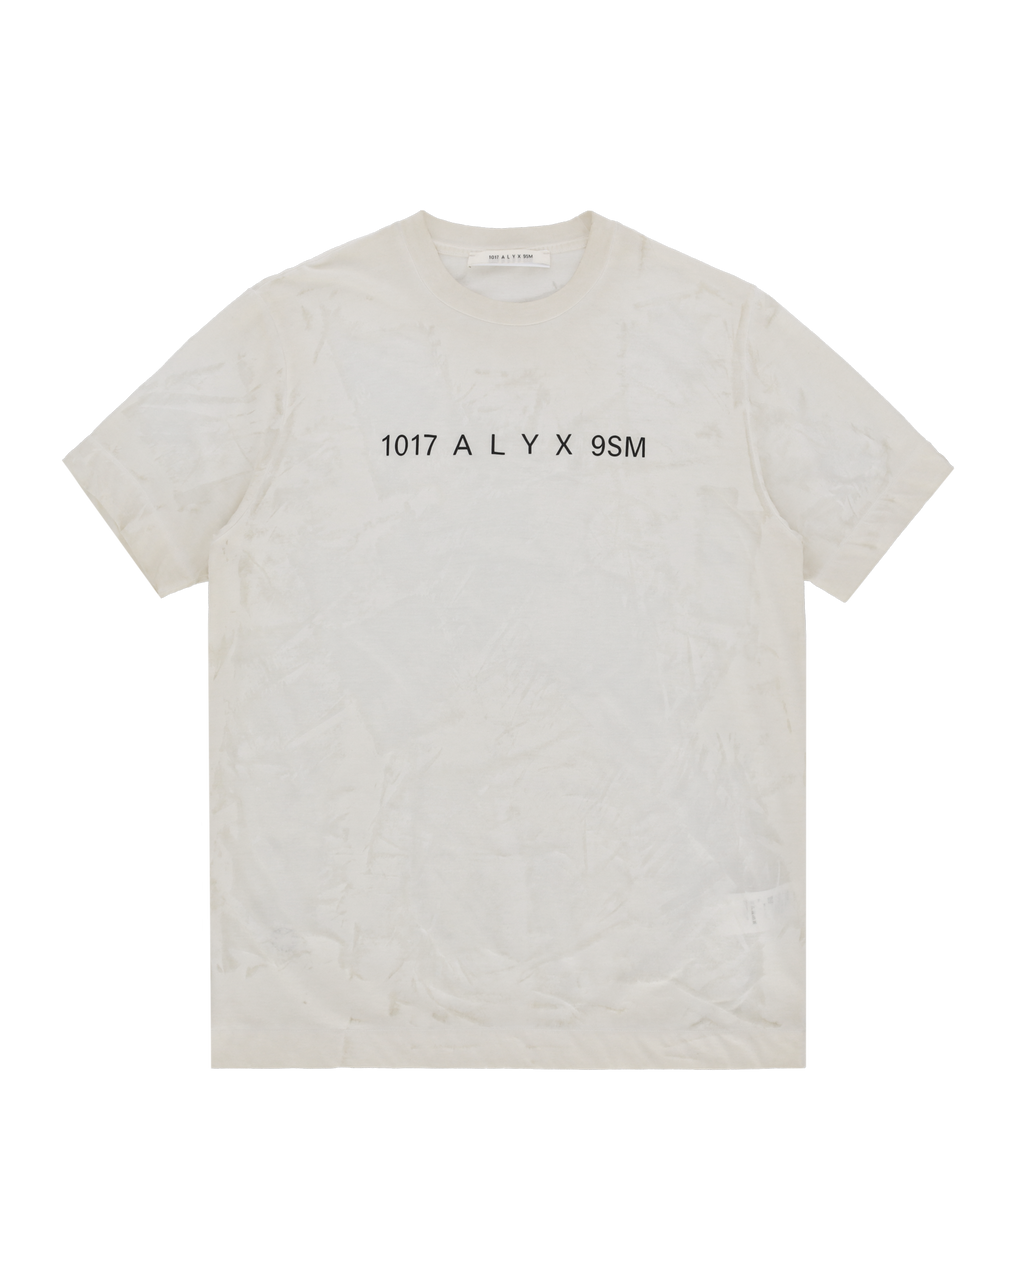 Official Store – 1017 ALYX 9SM